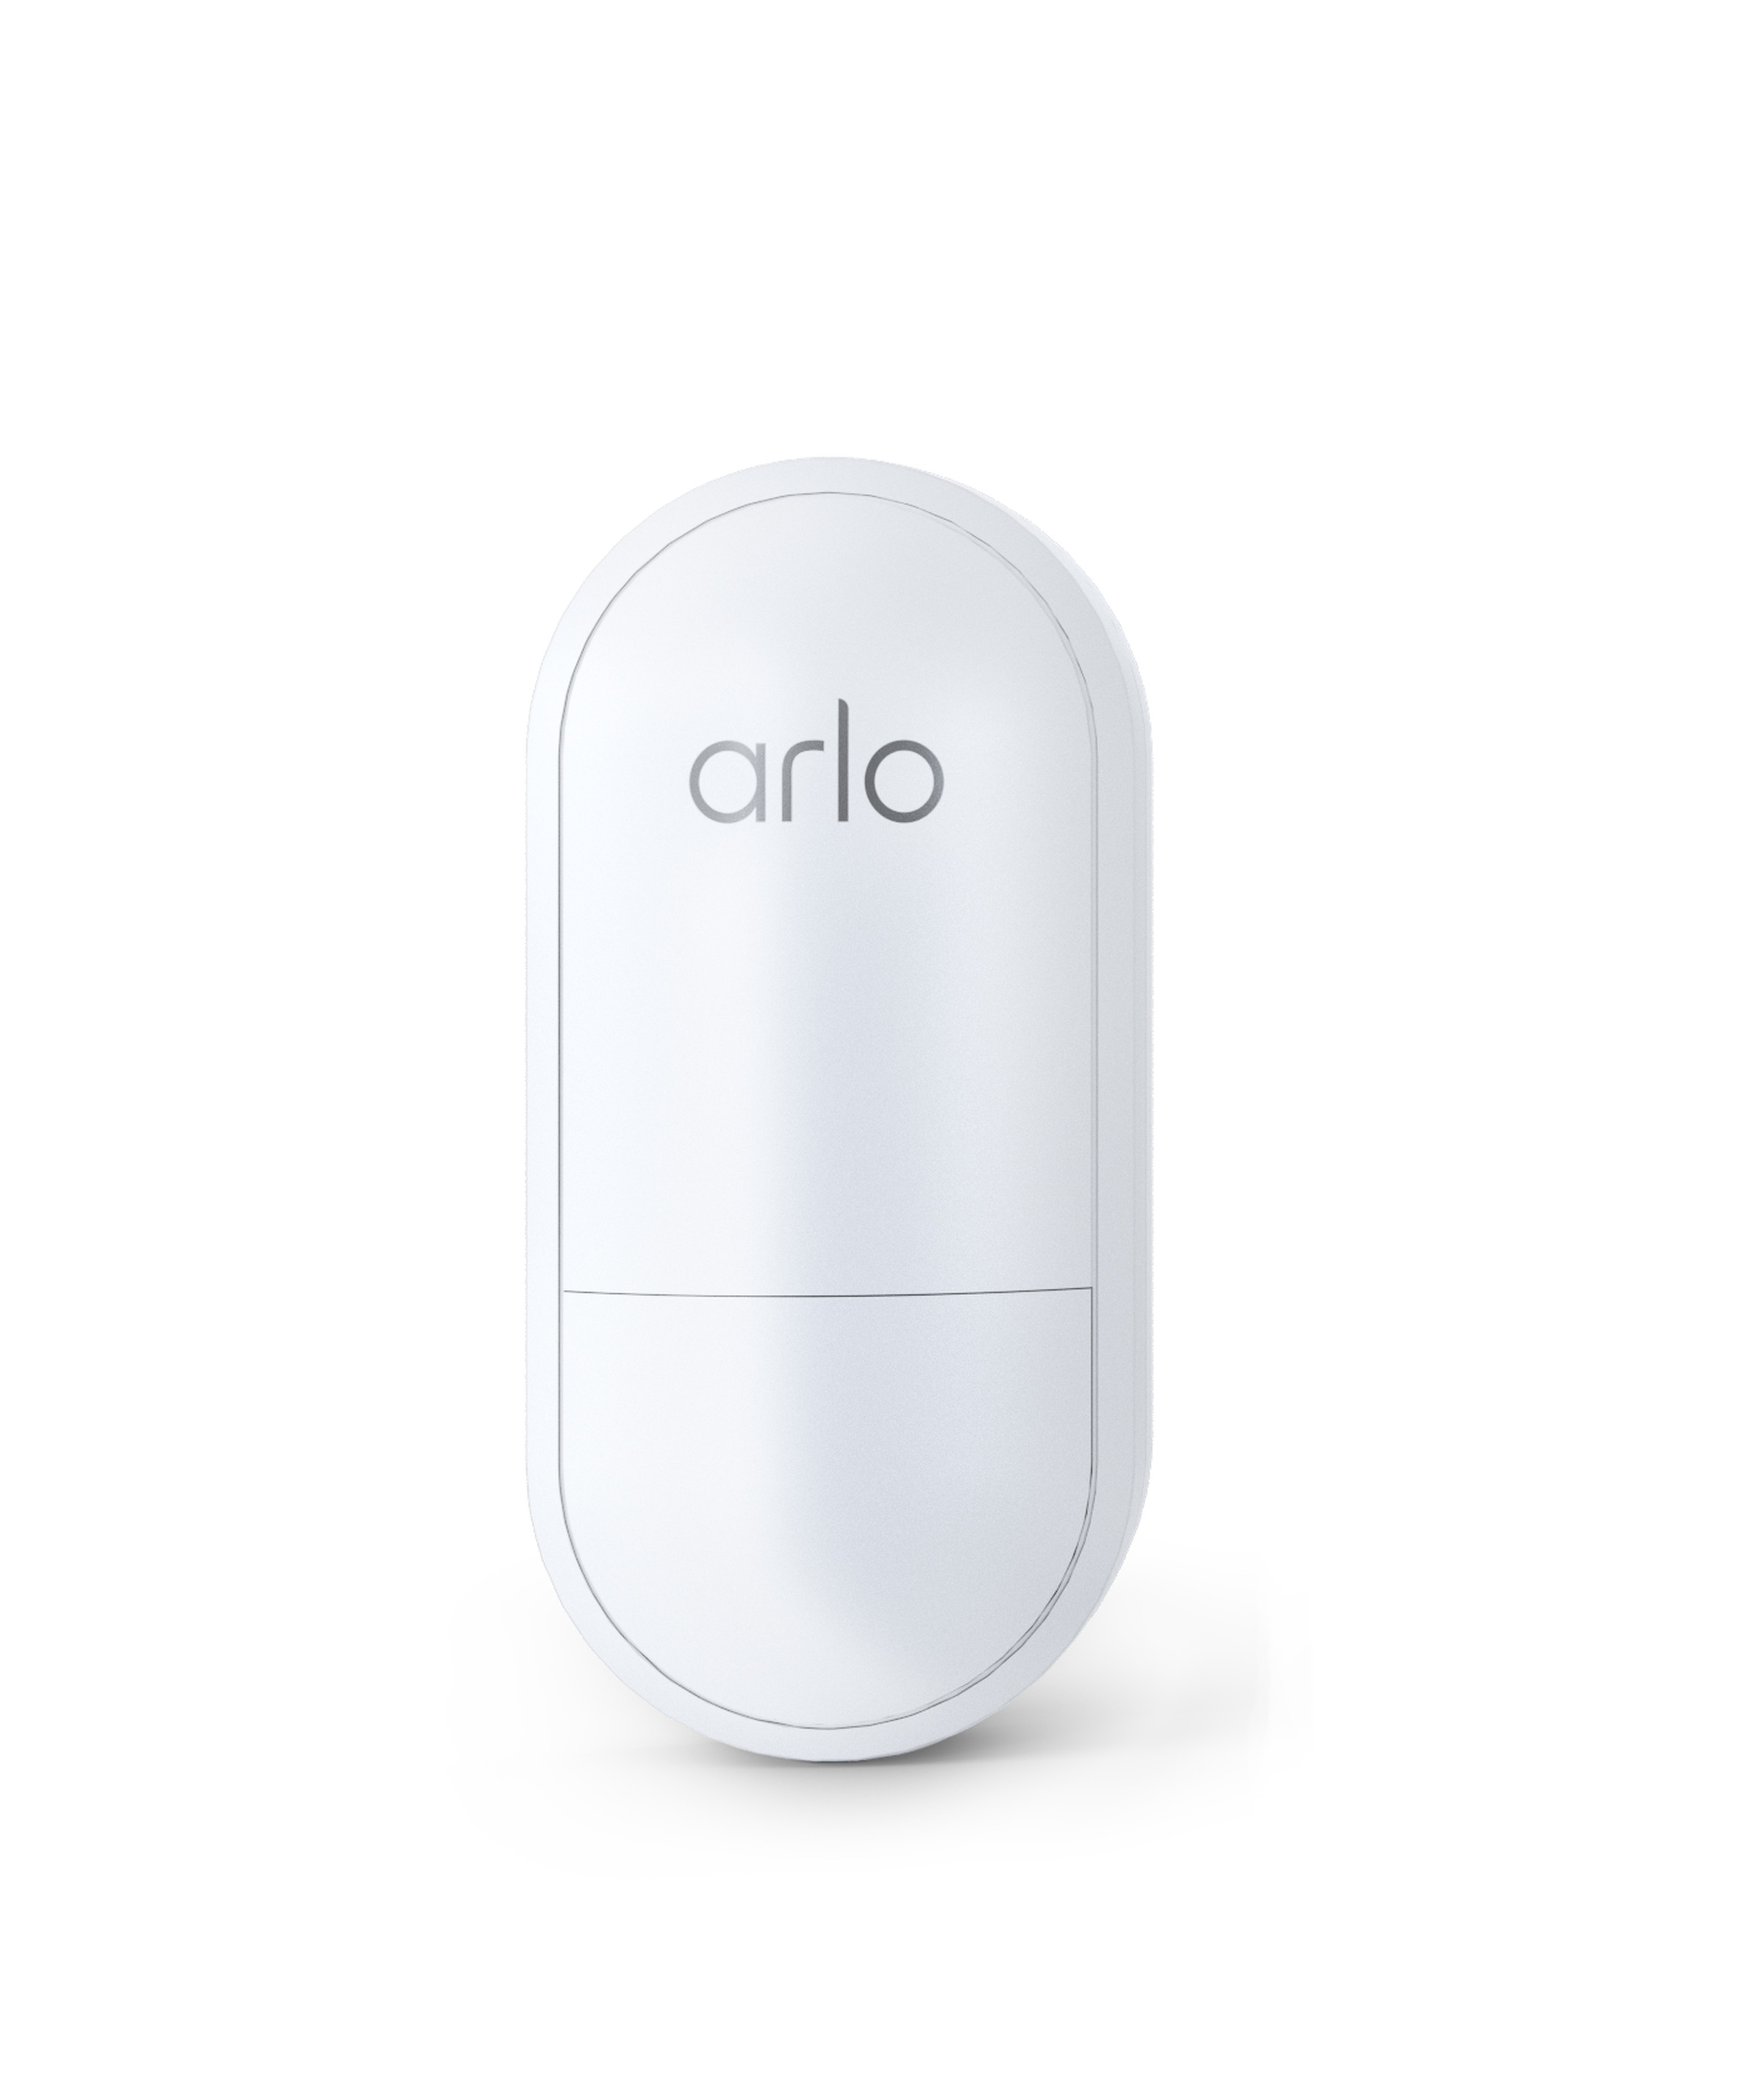 Arlo’s new security system uses these single multi-sensors to monitor your home.